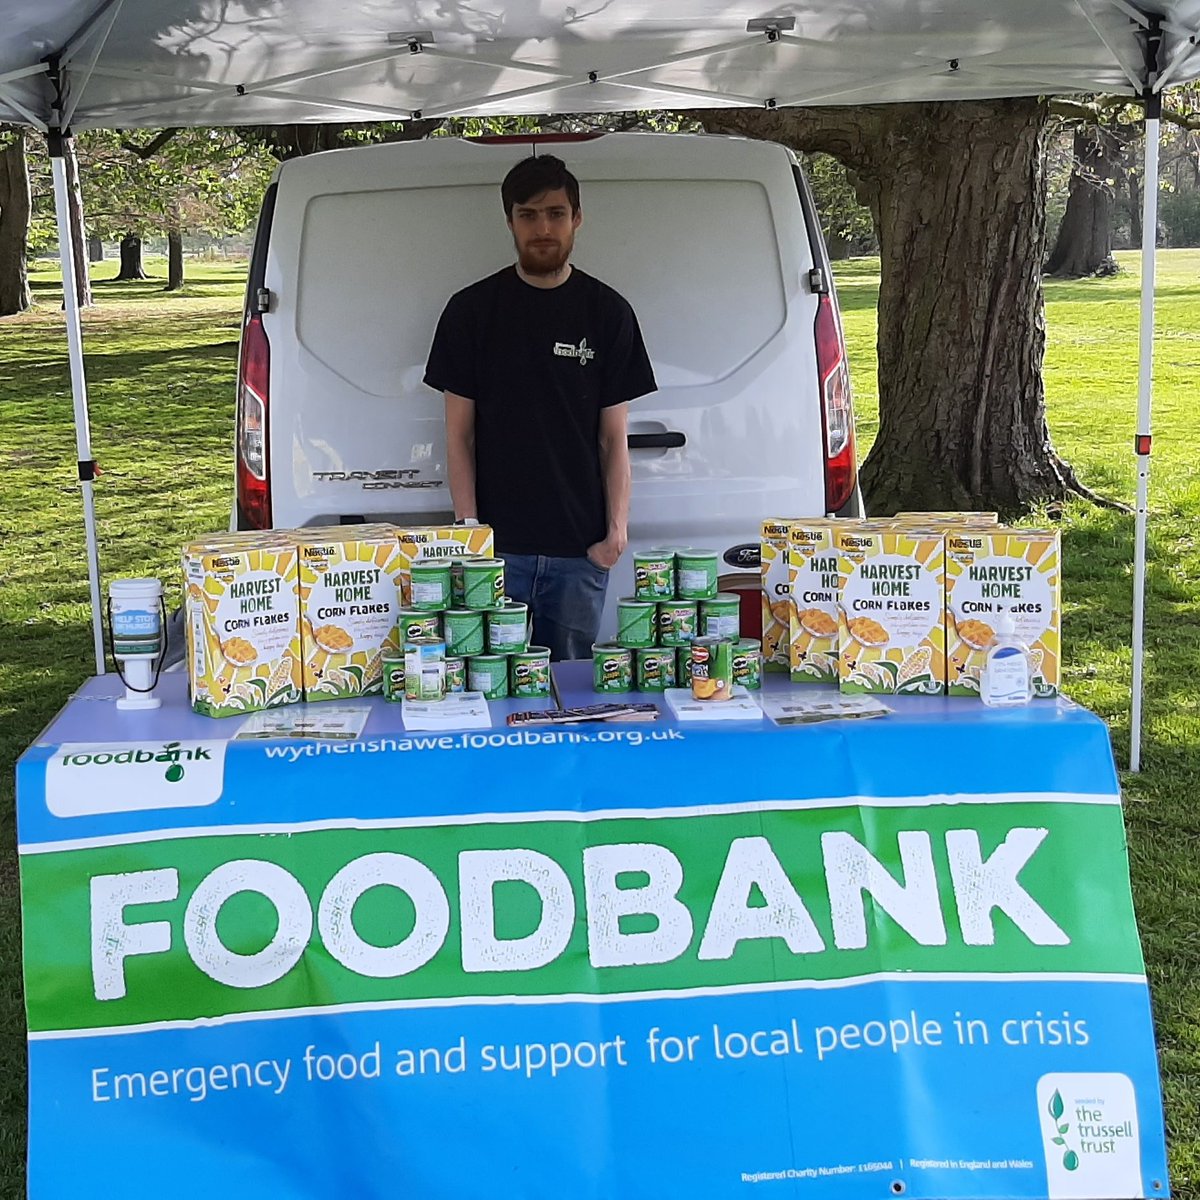 We're at Wythenshawe Park until 4pm today. Come join in the Easter Egg hunt and find out about the work of the foodbank. We're opposite Wythenshawe Hall! #EasterFun #CostOfLivingCrisis